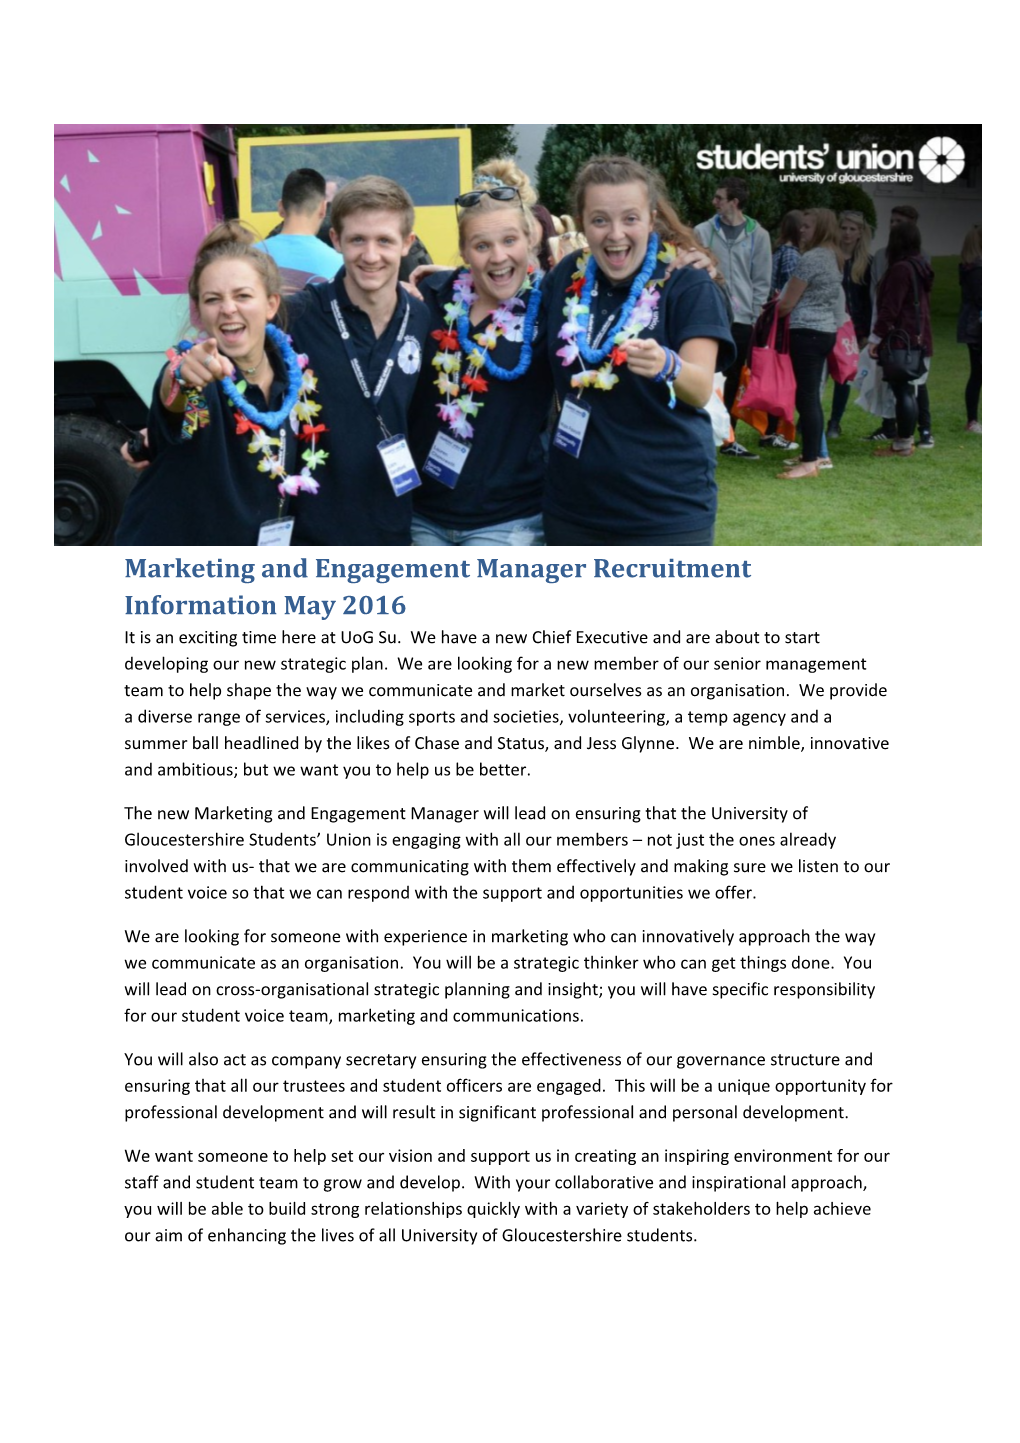 Marketing and Engagement Manager Recruitment Information May 2016